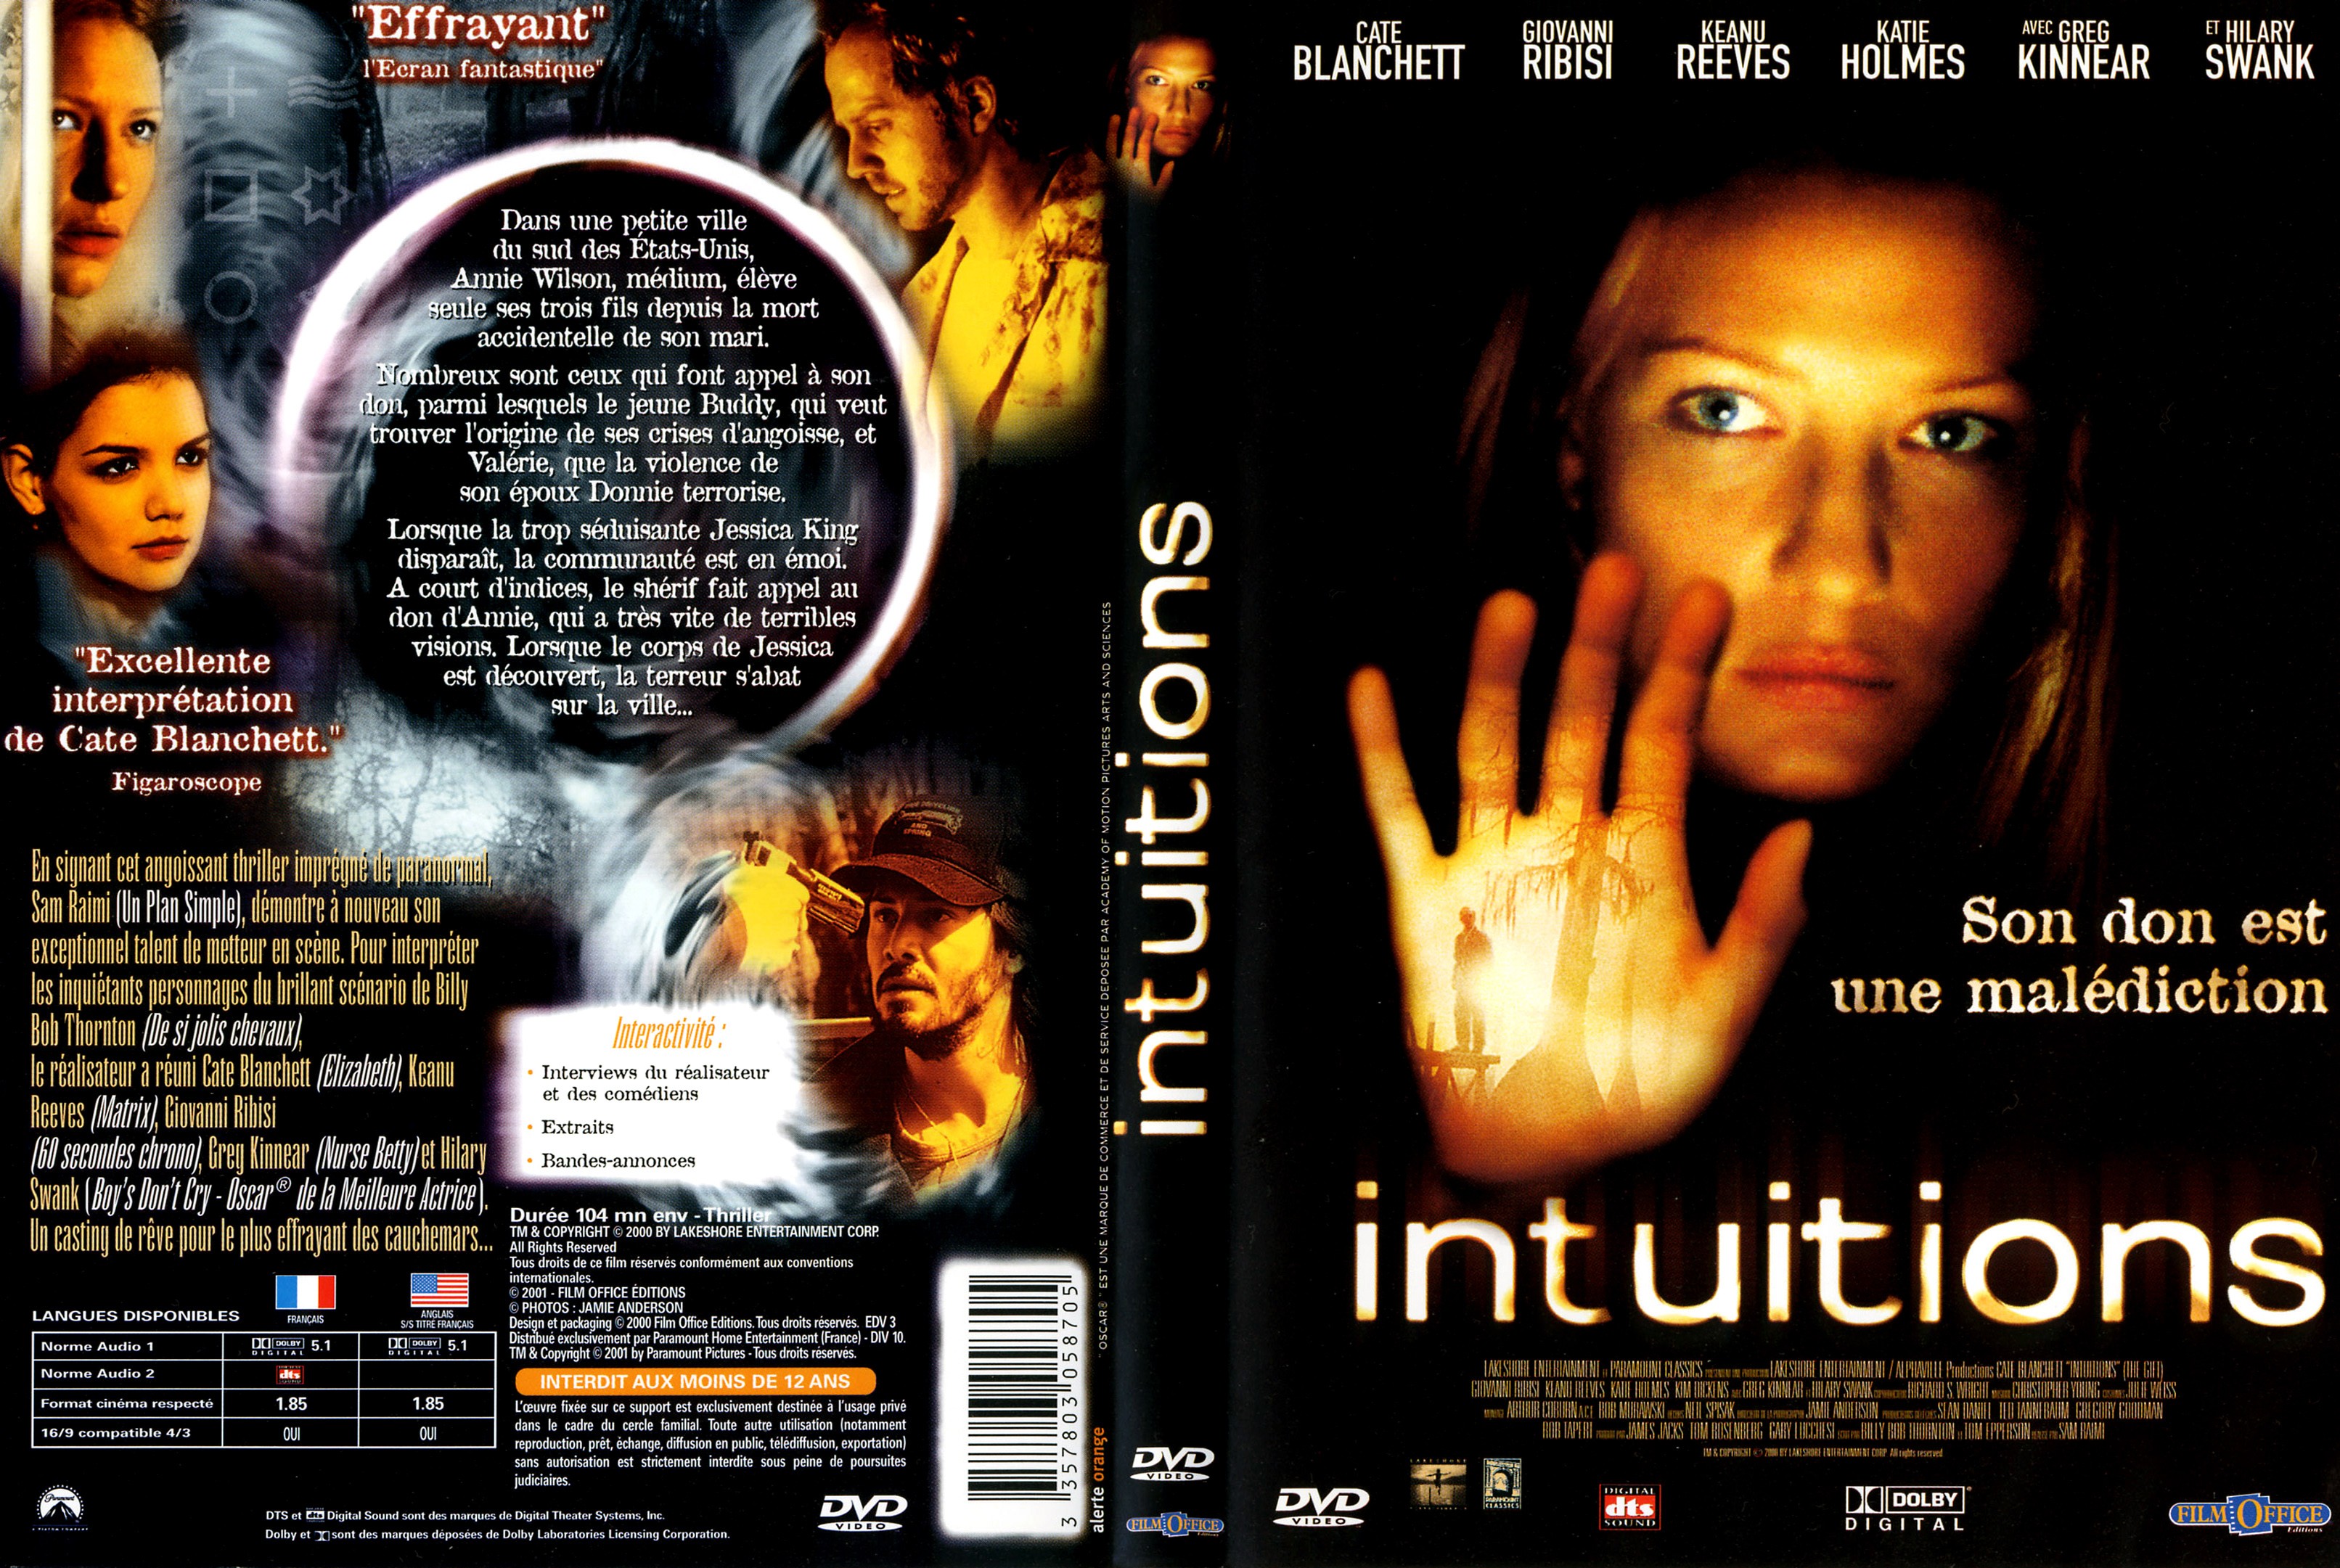 Jaquette DVD Intuitions